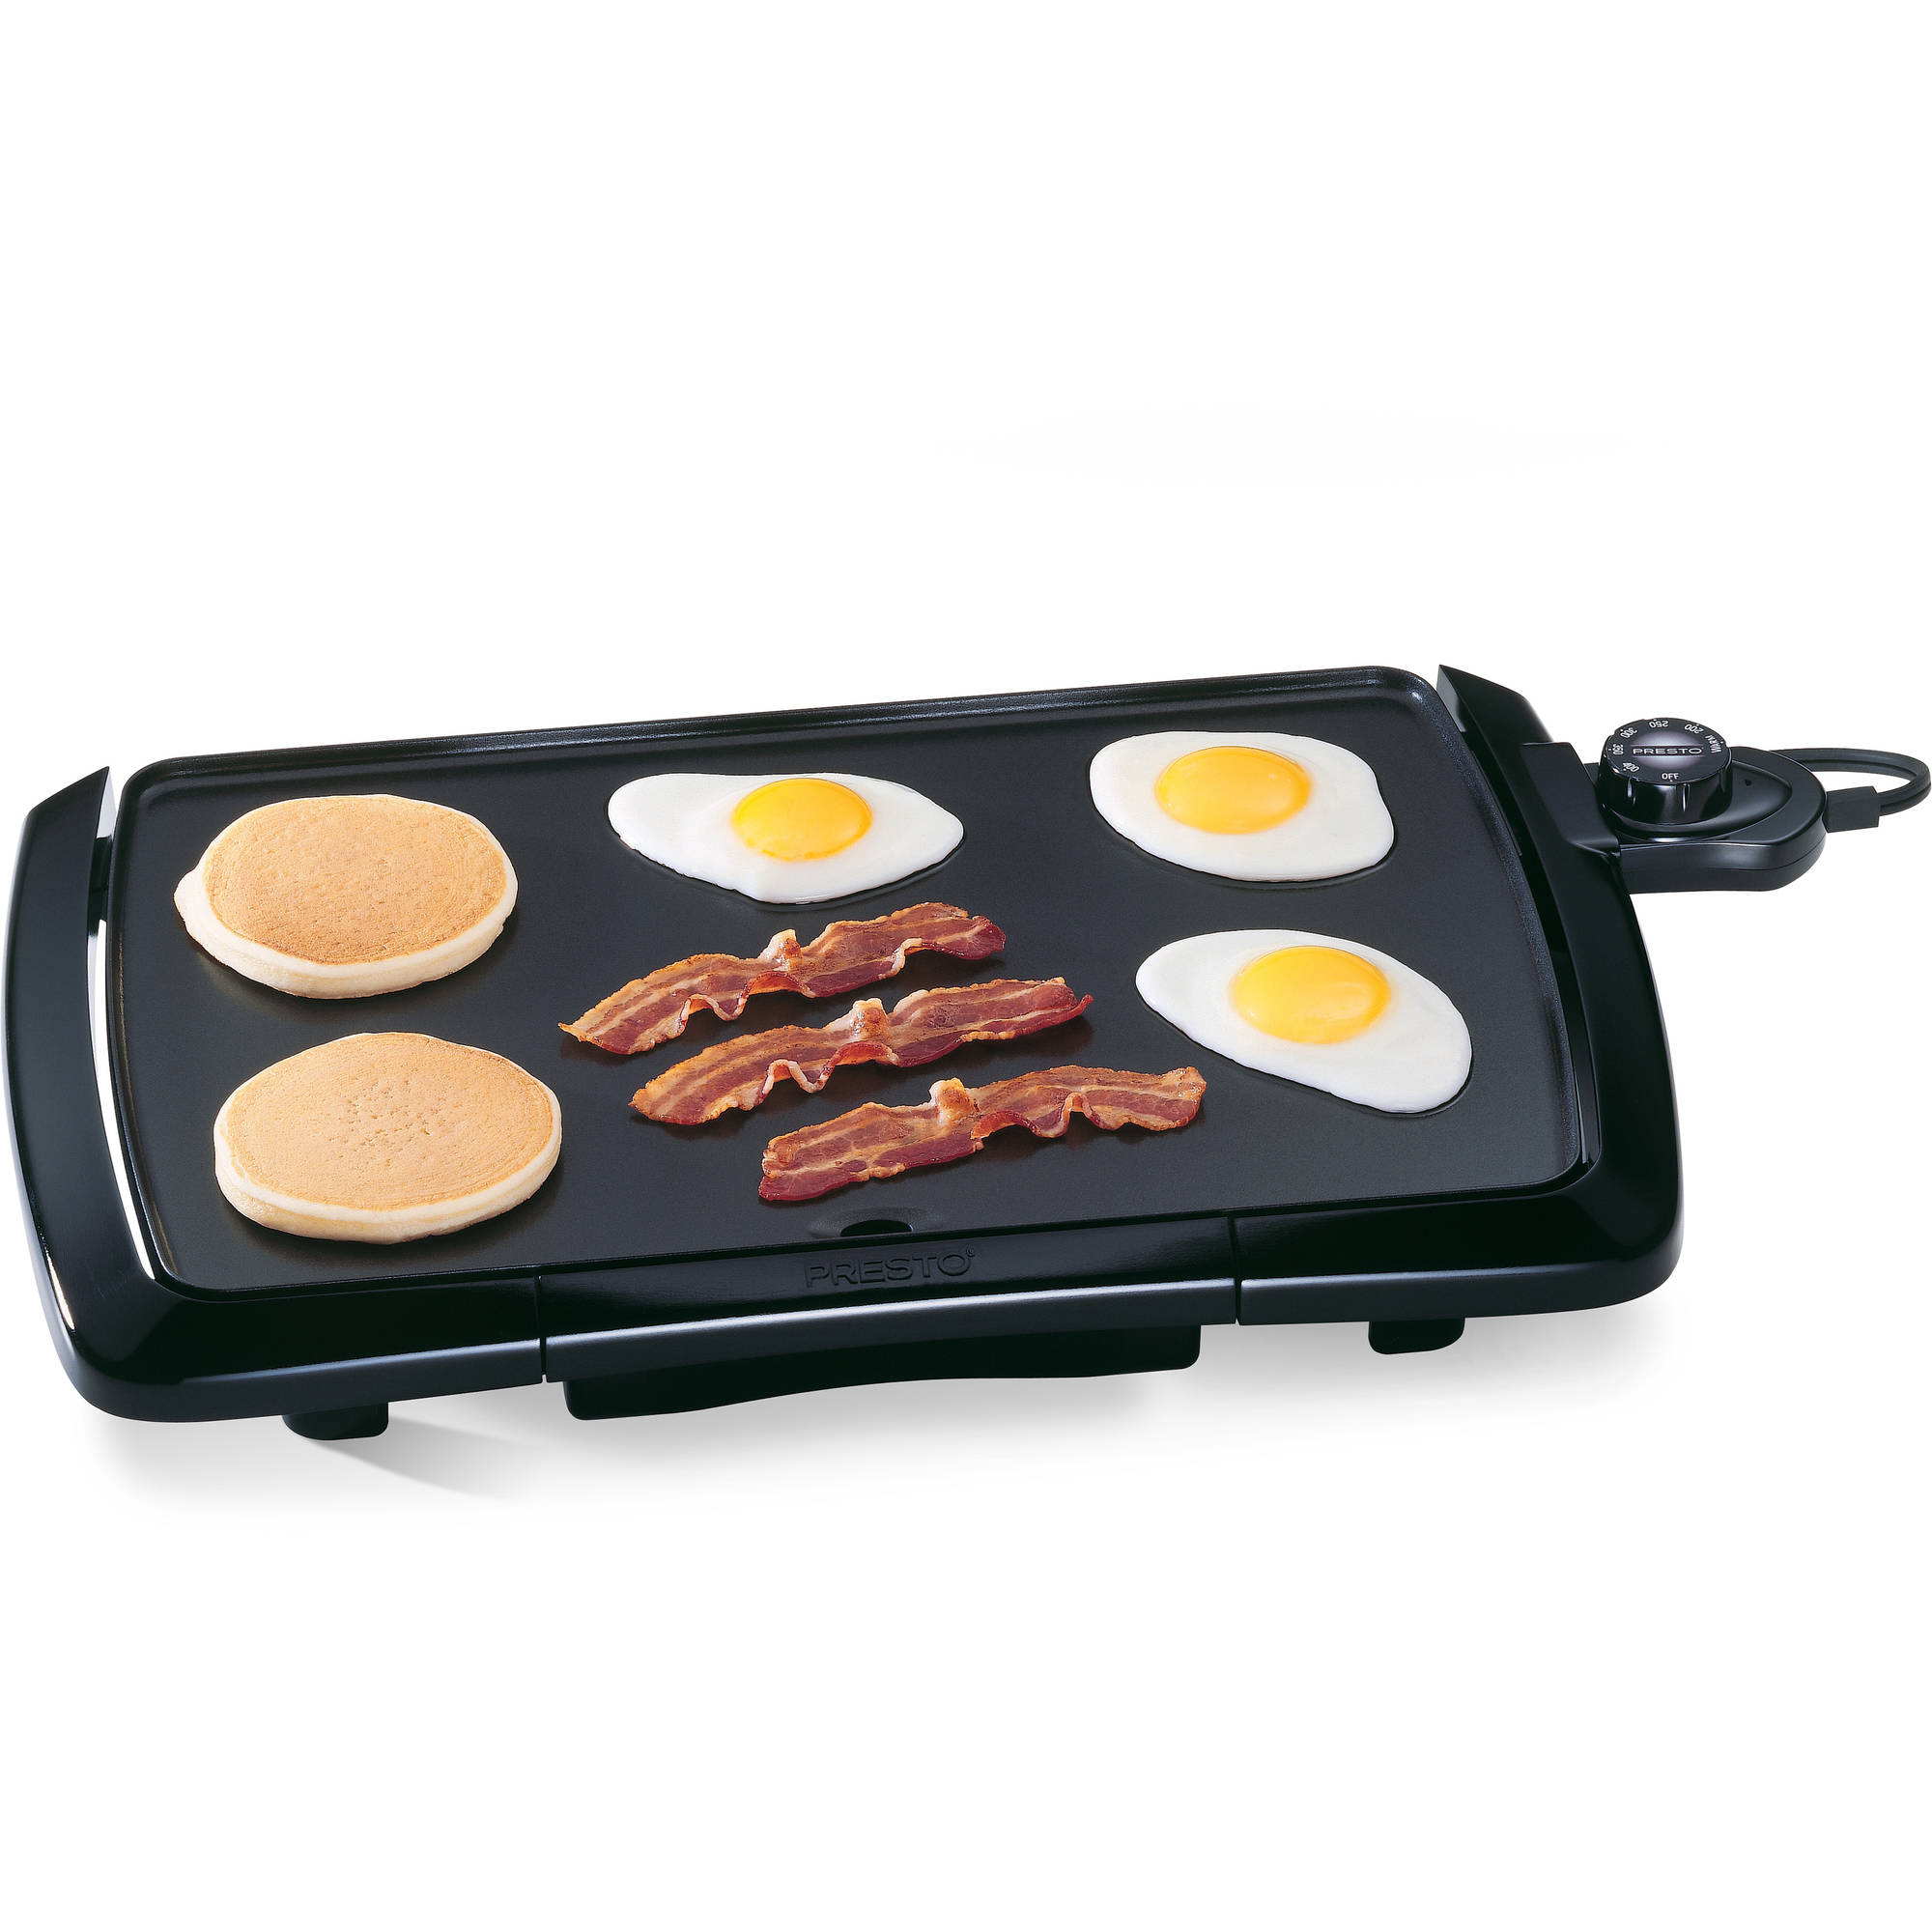 Presto Cool-Touch Electric Griddle 07047 - image 1 of 3